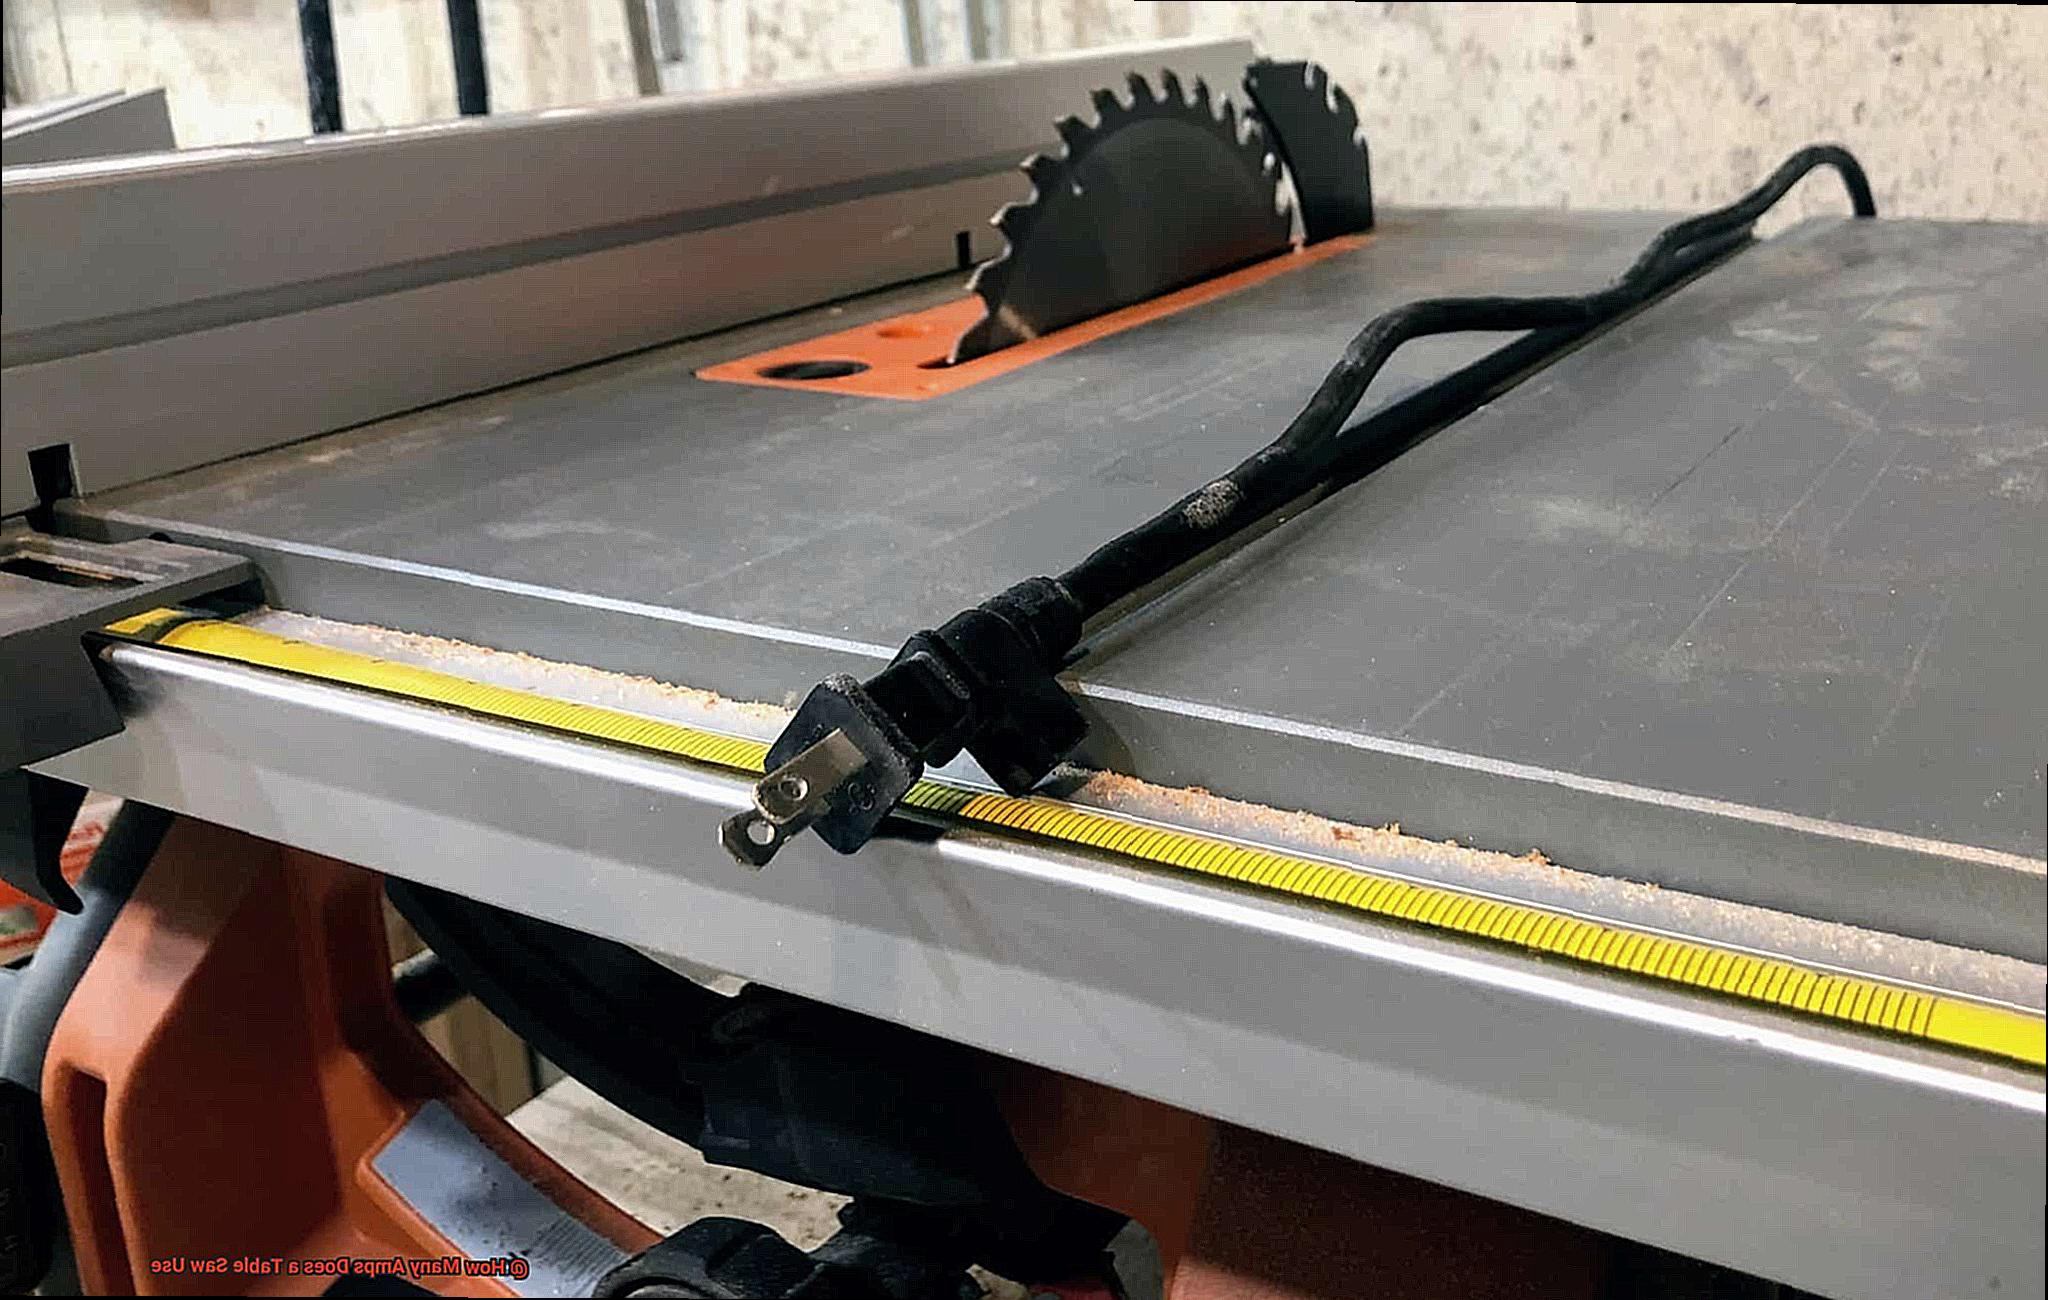 How Many Amps Does a Table Saw Use-5